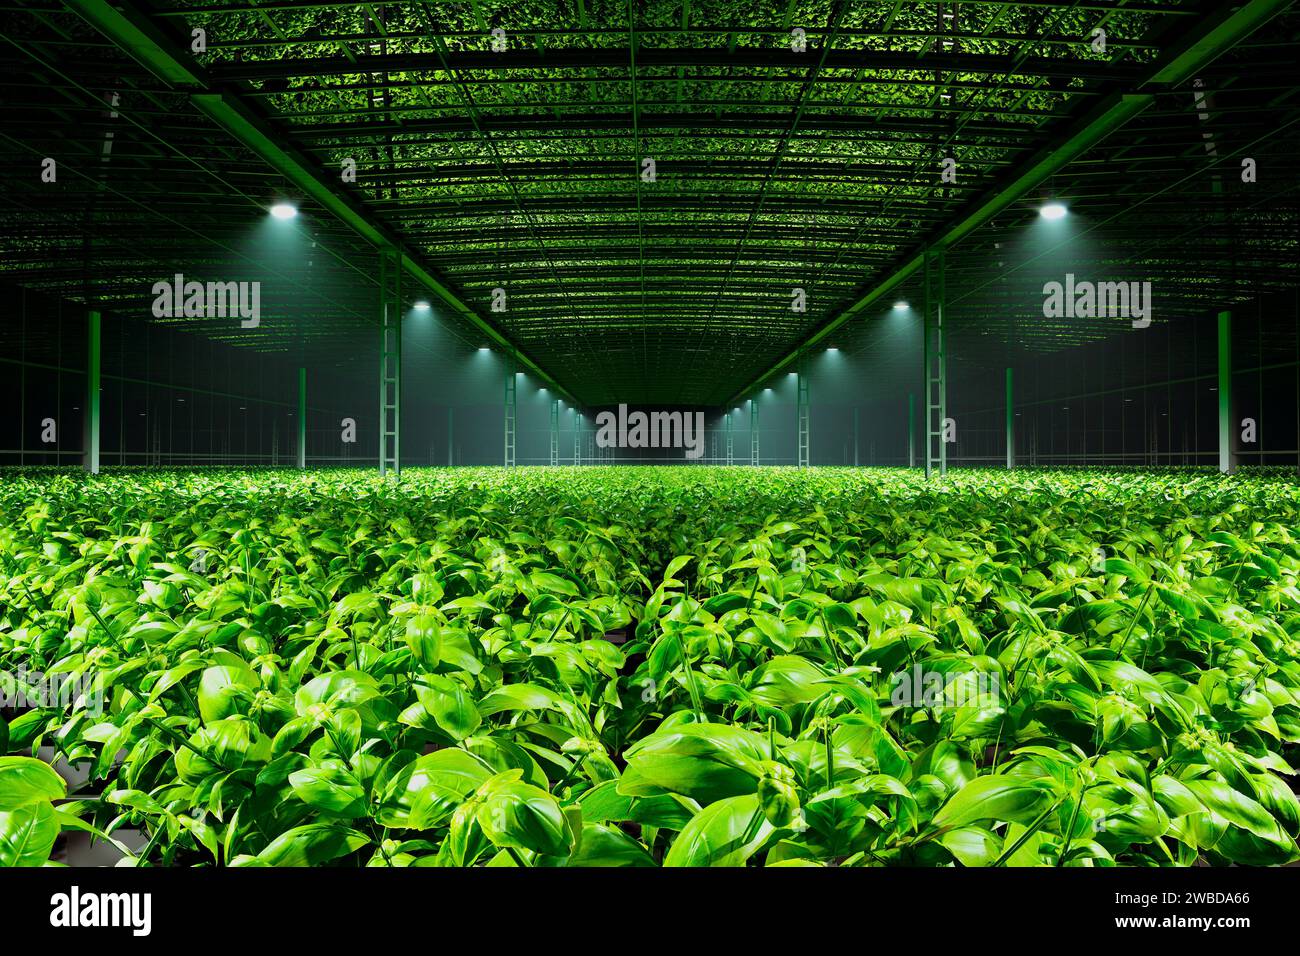 Robust basil plants thrive in a controlled, advanced hydroponic system within an indoor greenhouse, utilizing eco-friendly LED lighting for efficient Stock Photo